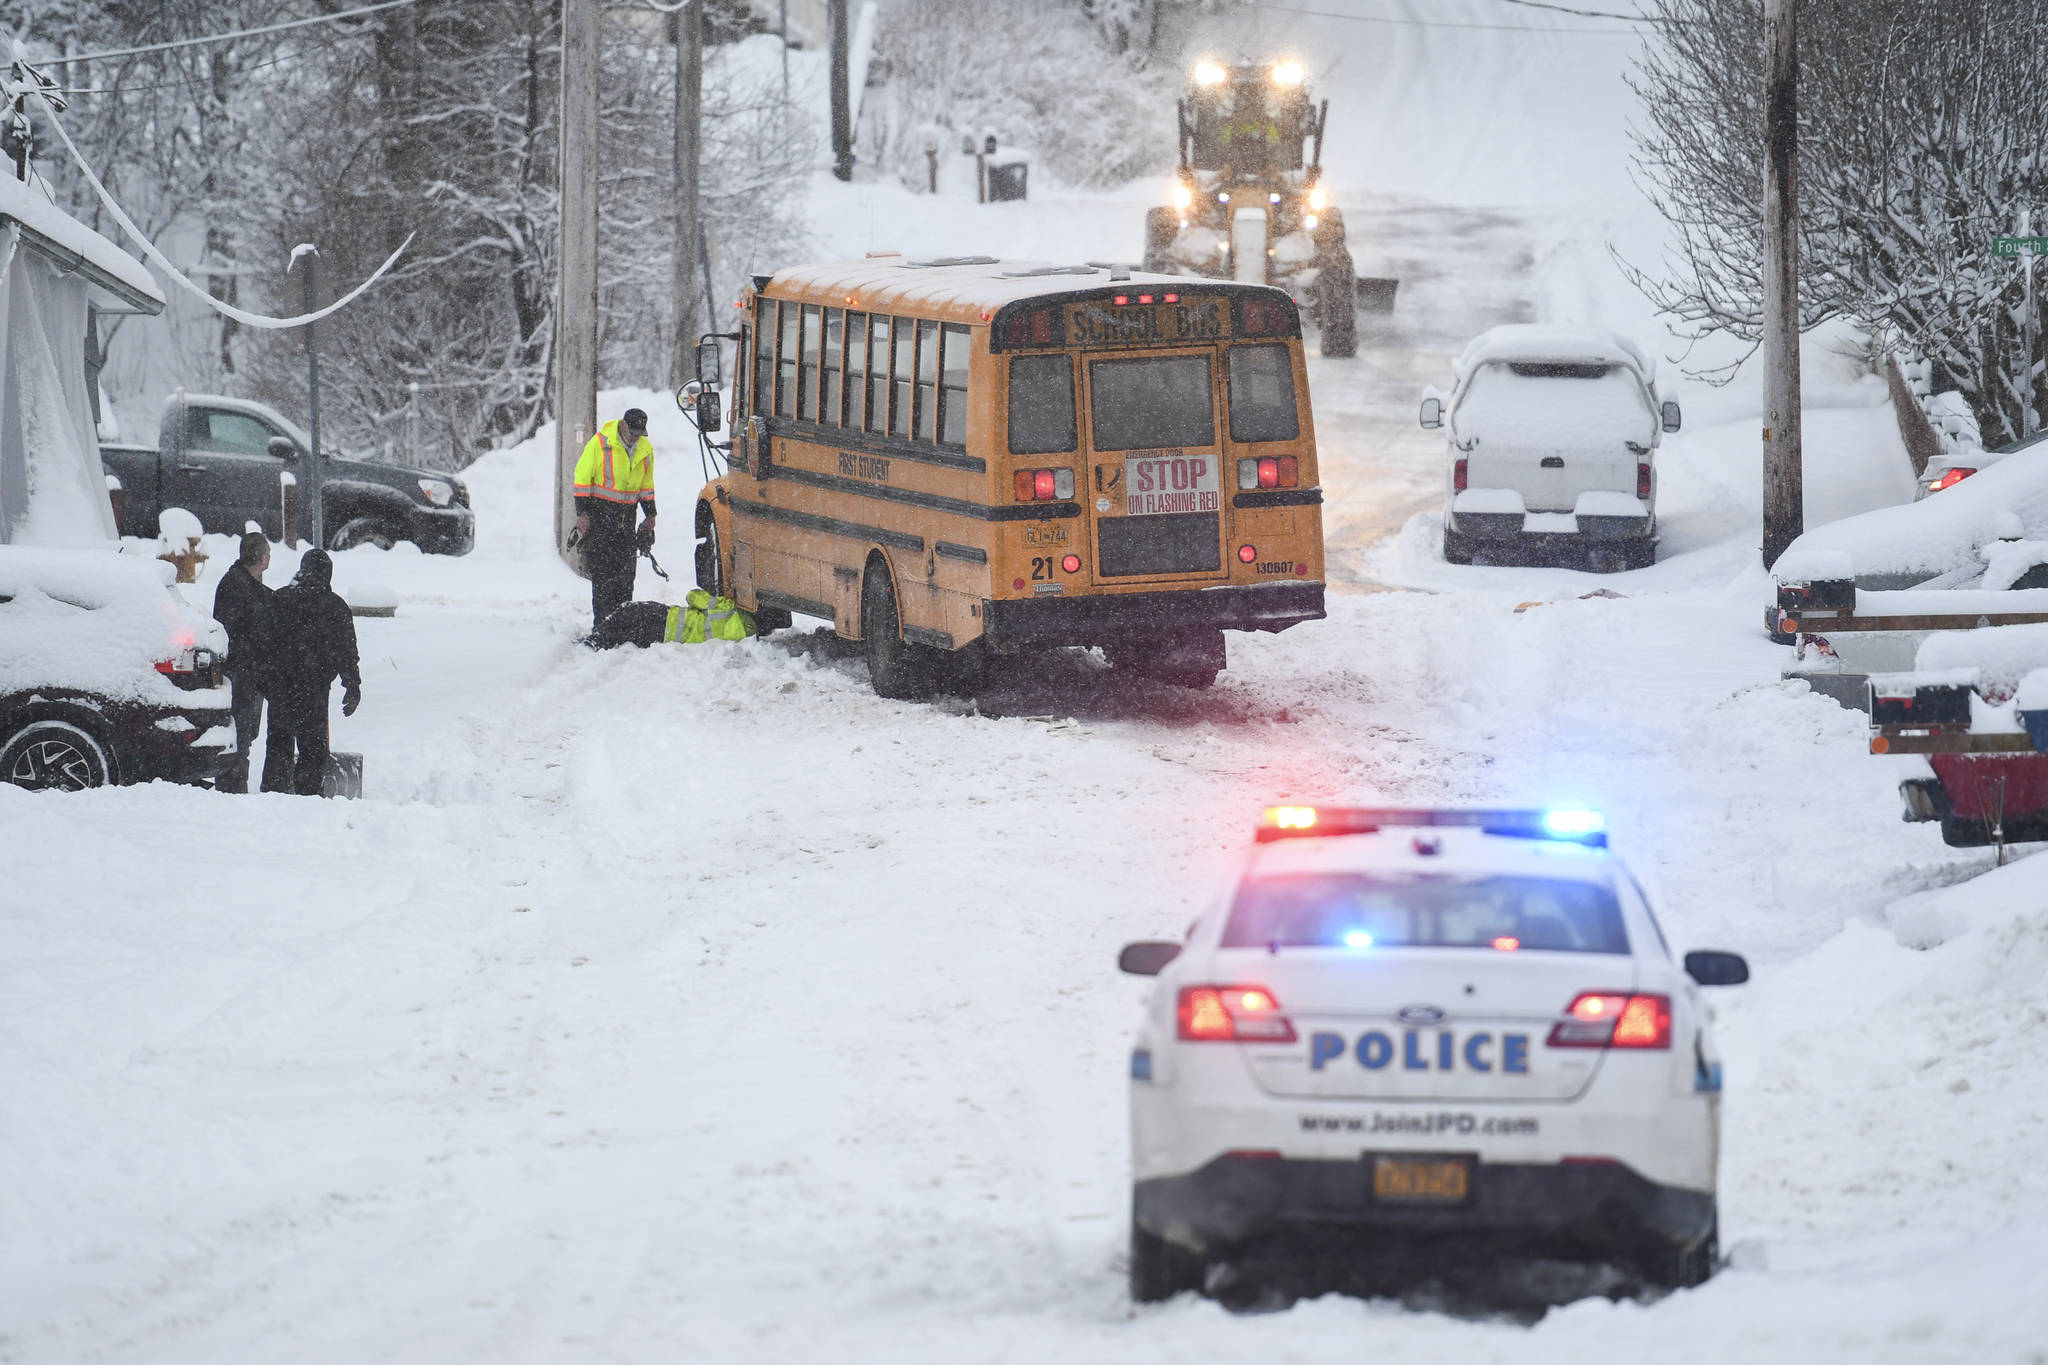 A First Student school bus stalls out at D and 4th Streets in Douglas after snowfall on Tuesday, Jan. 7, 2020. No students were on the bus at the time and the bus was safely backed down the street. (Michael Penn | Juneau Empire)